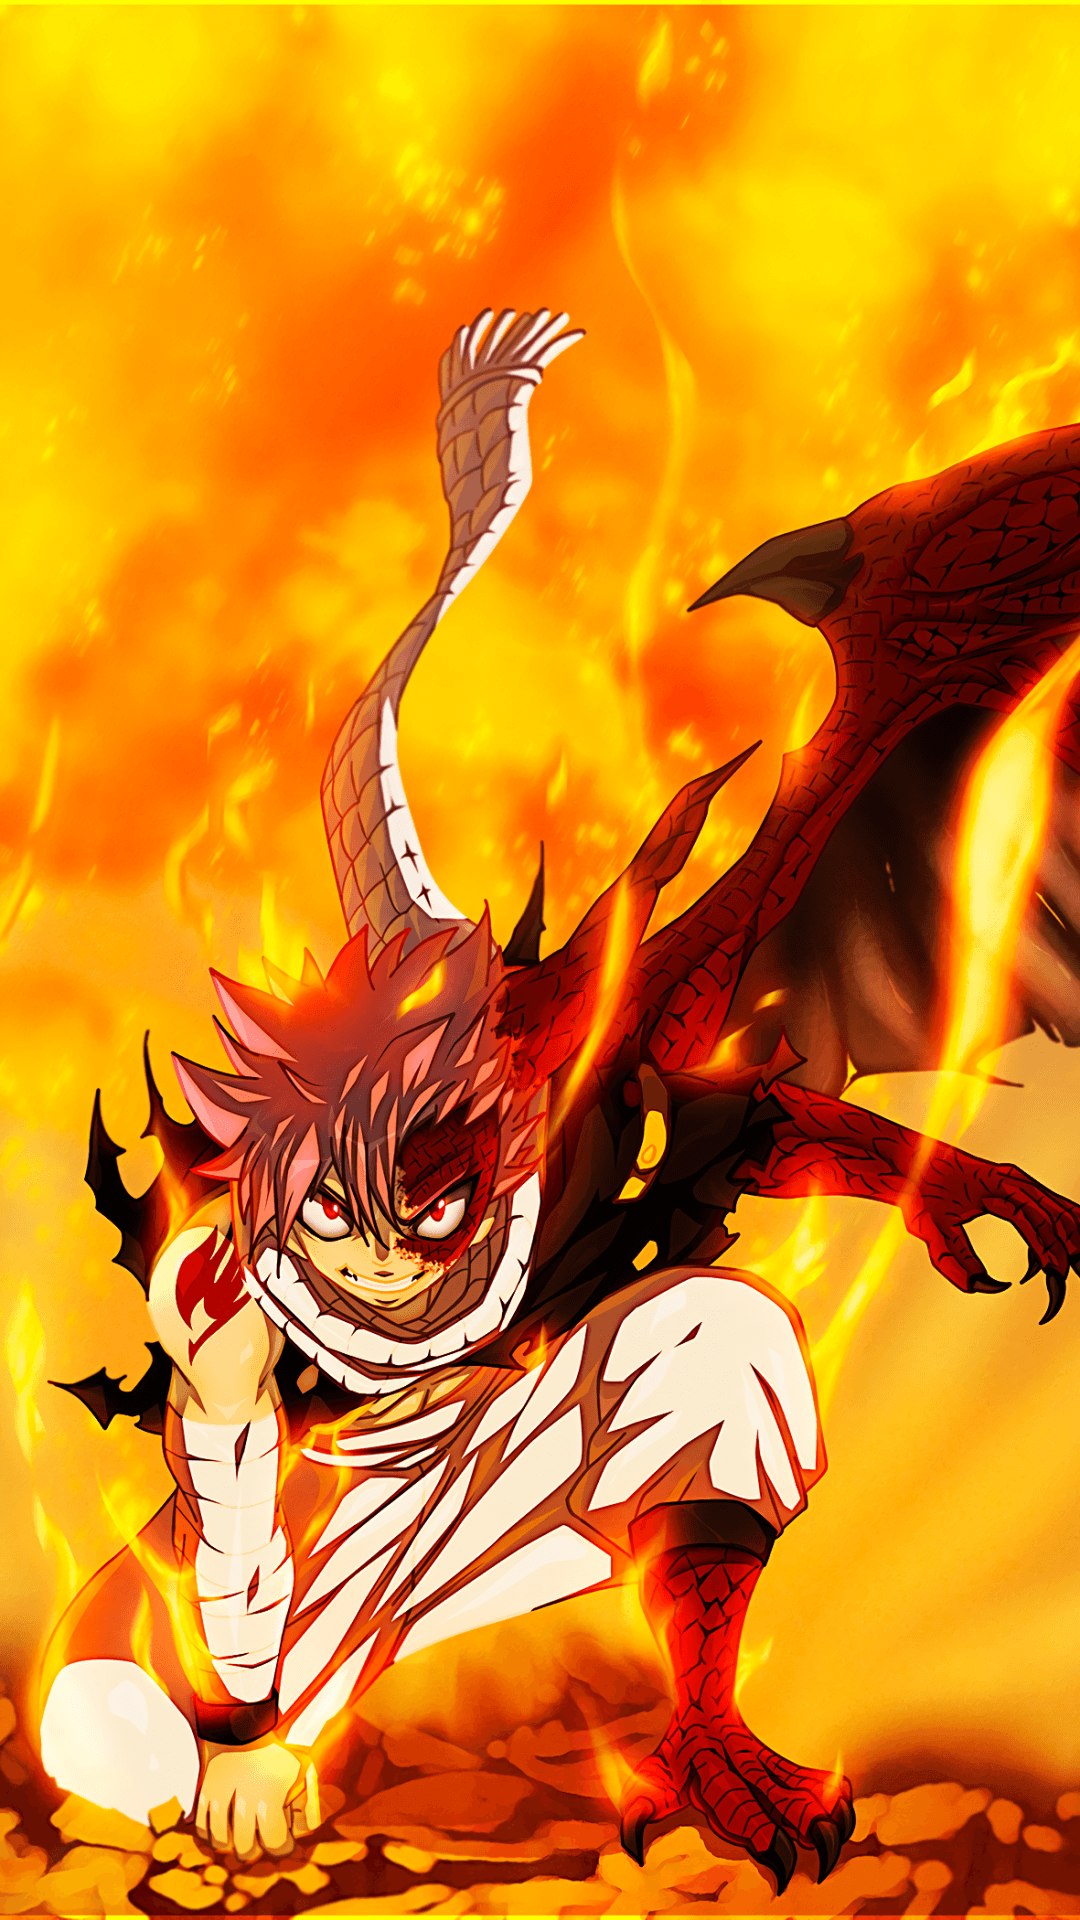 Anime Fairy Tail Natsu Dragneel Fire Mobile Wallpapers